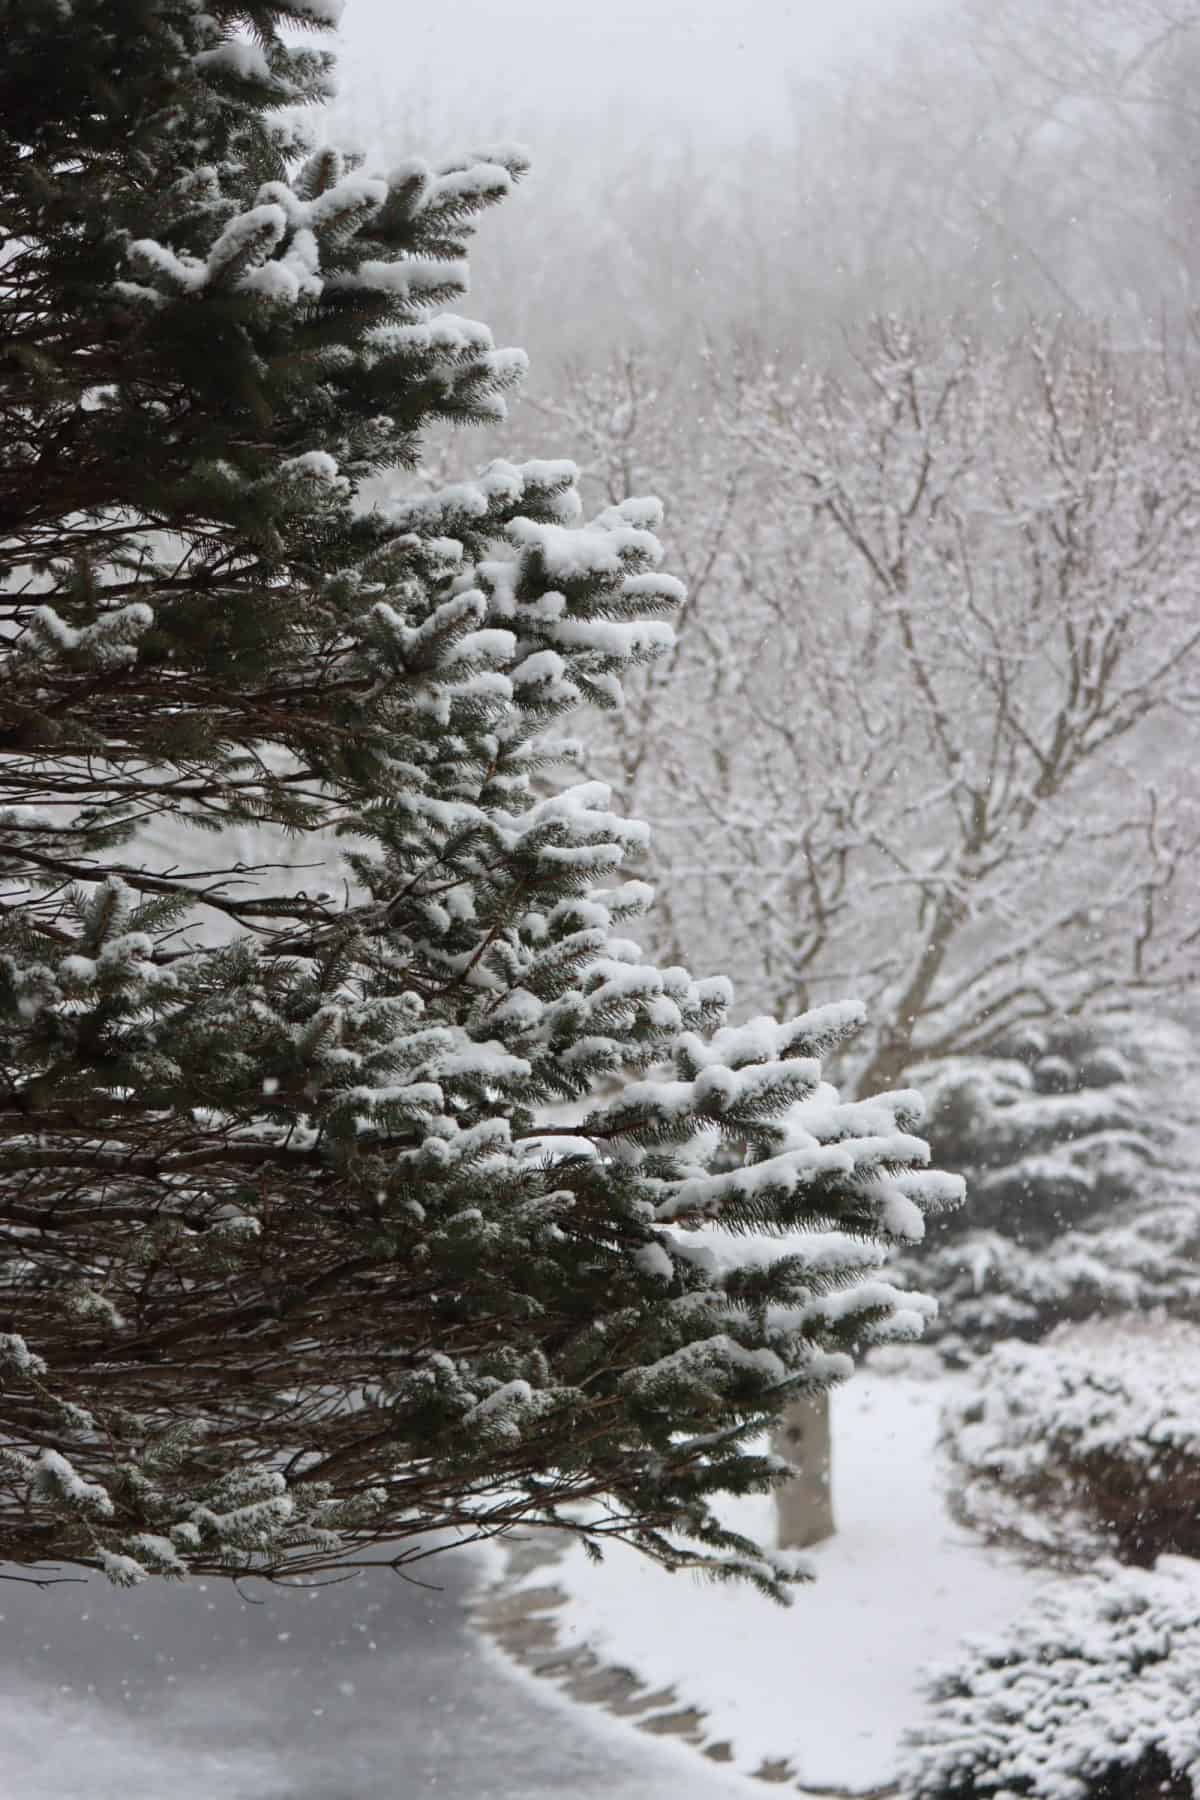 evergreen tree covered in snow with bushes covered in snow